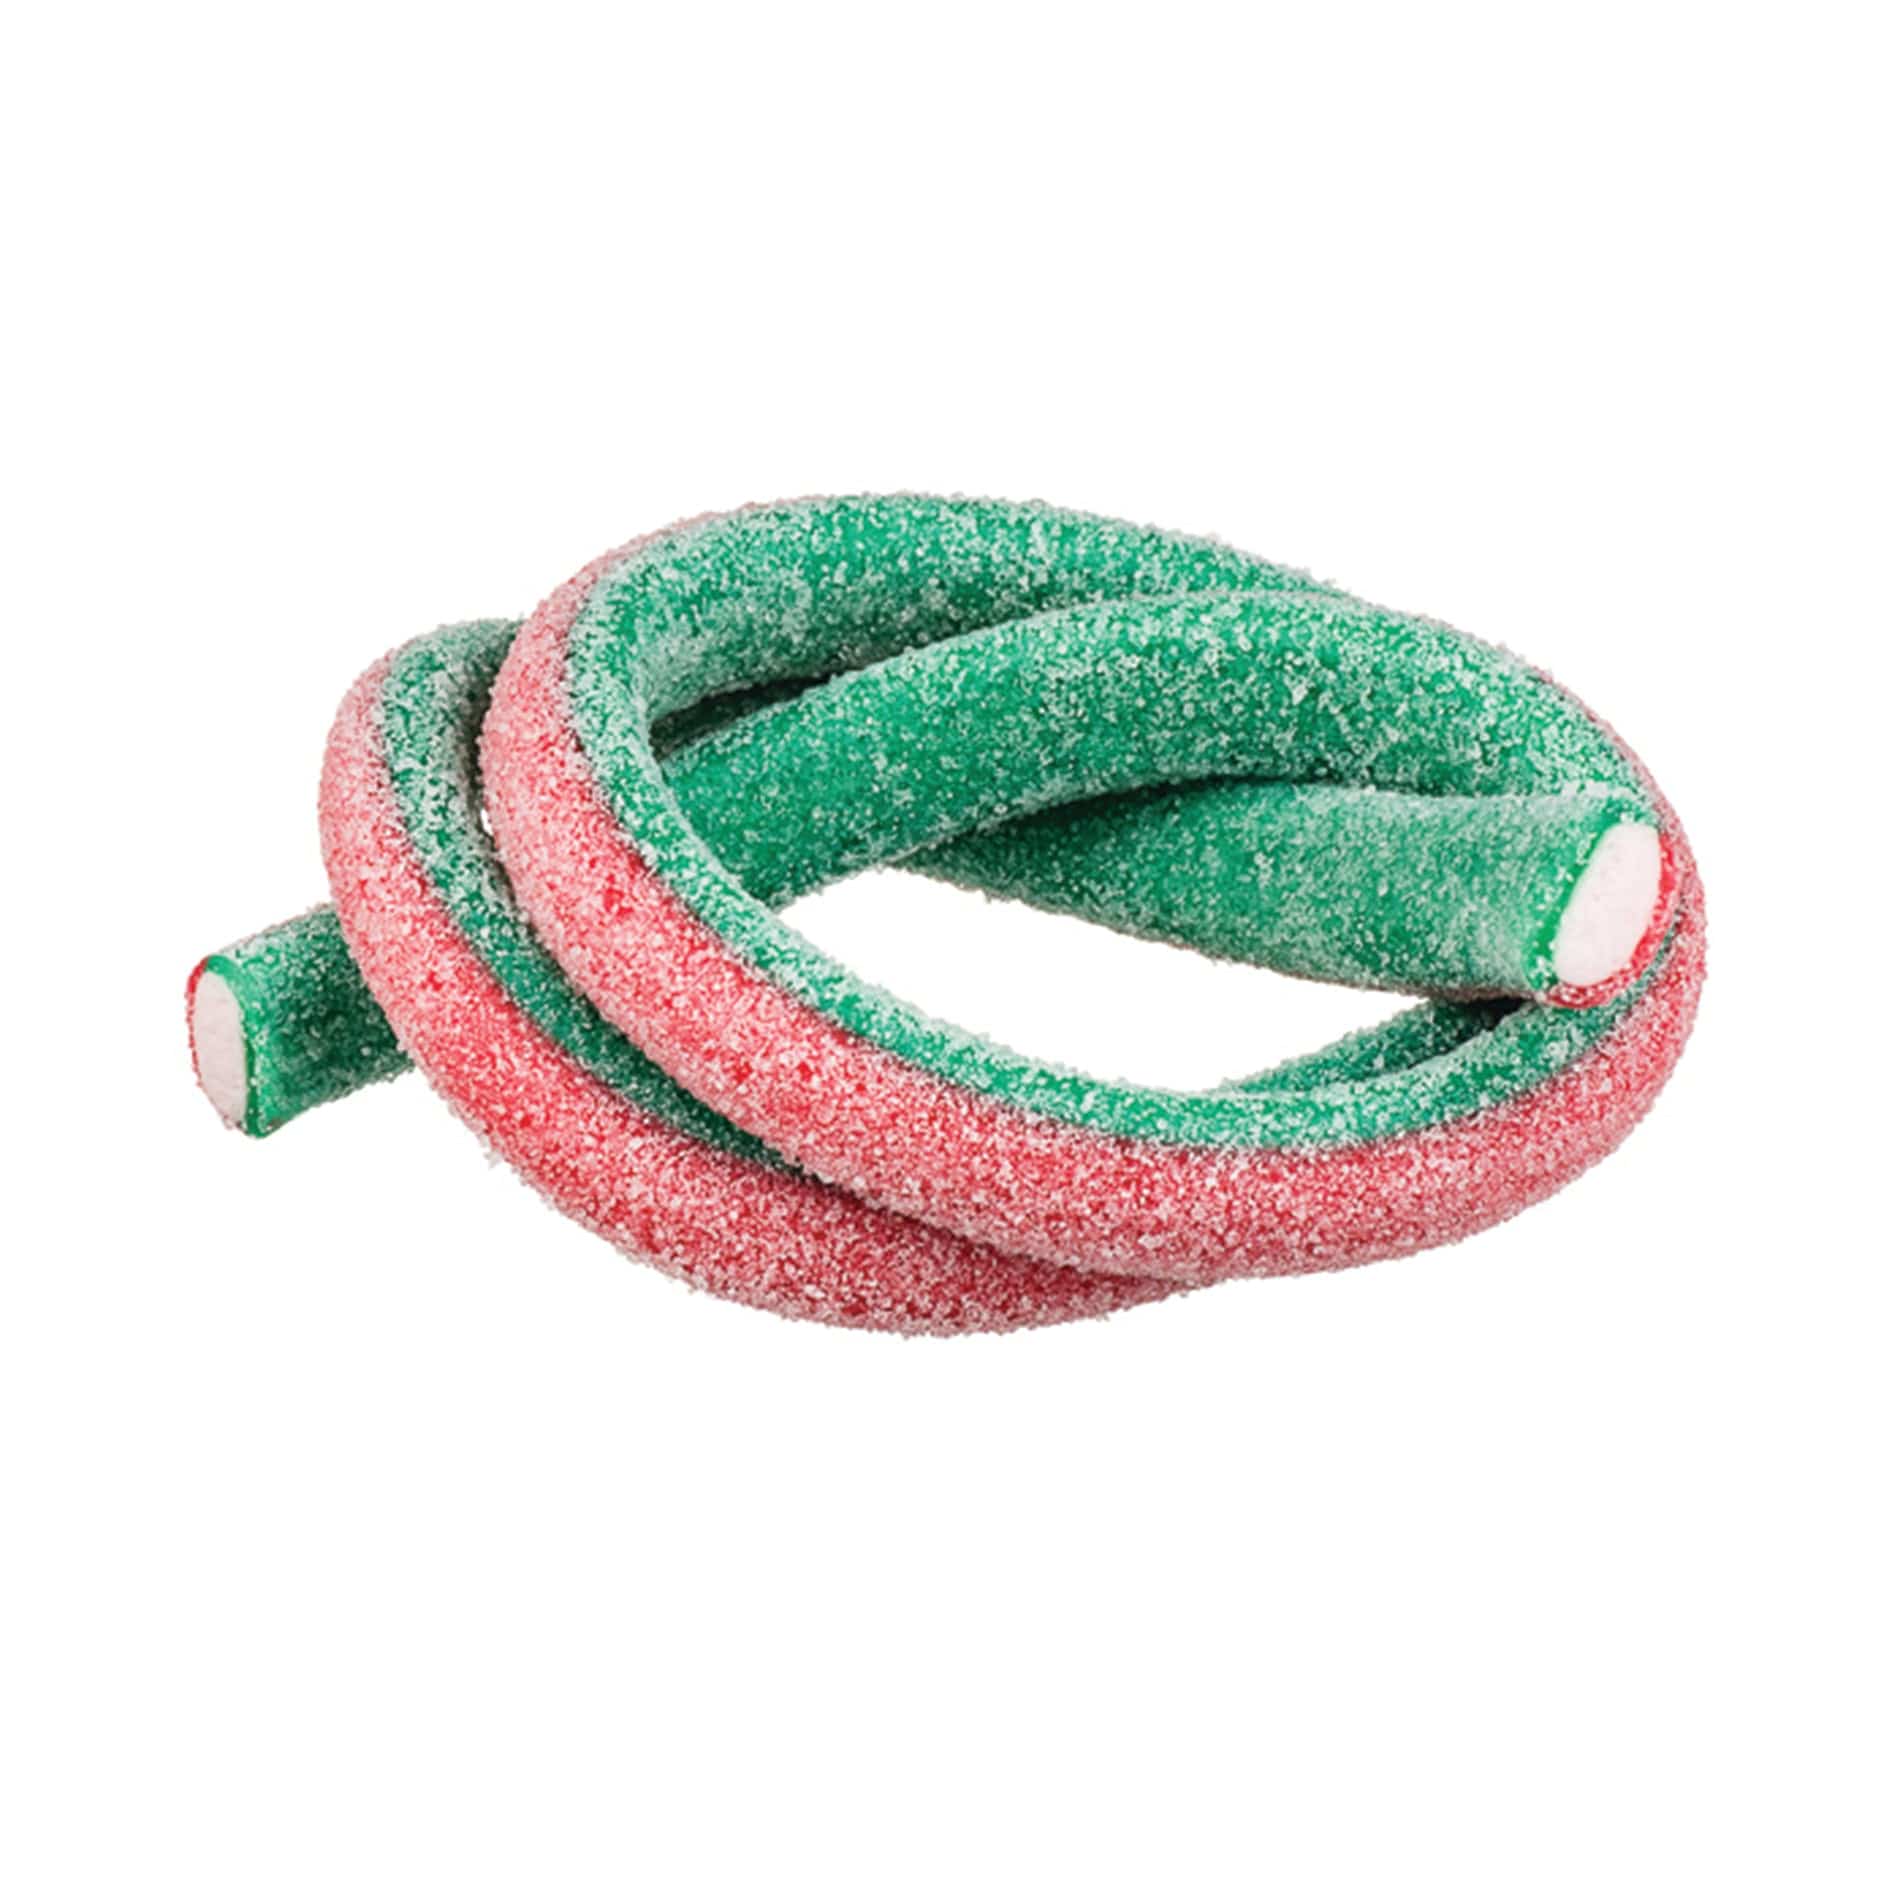 Novelty Concessions Gummy Rope SOUR WATERMELON STRAWBERRY / 1 Pack (30 pieces) Meeega Cables European Chewy Rope Candy - Box of 30 individually wrapped Meeega Cables, each over 2-feet long cups with lids and straws